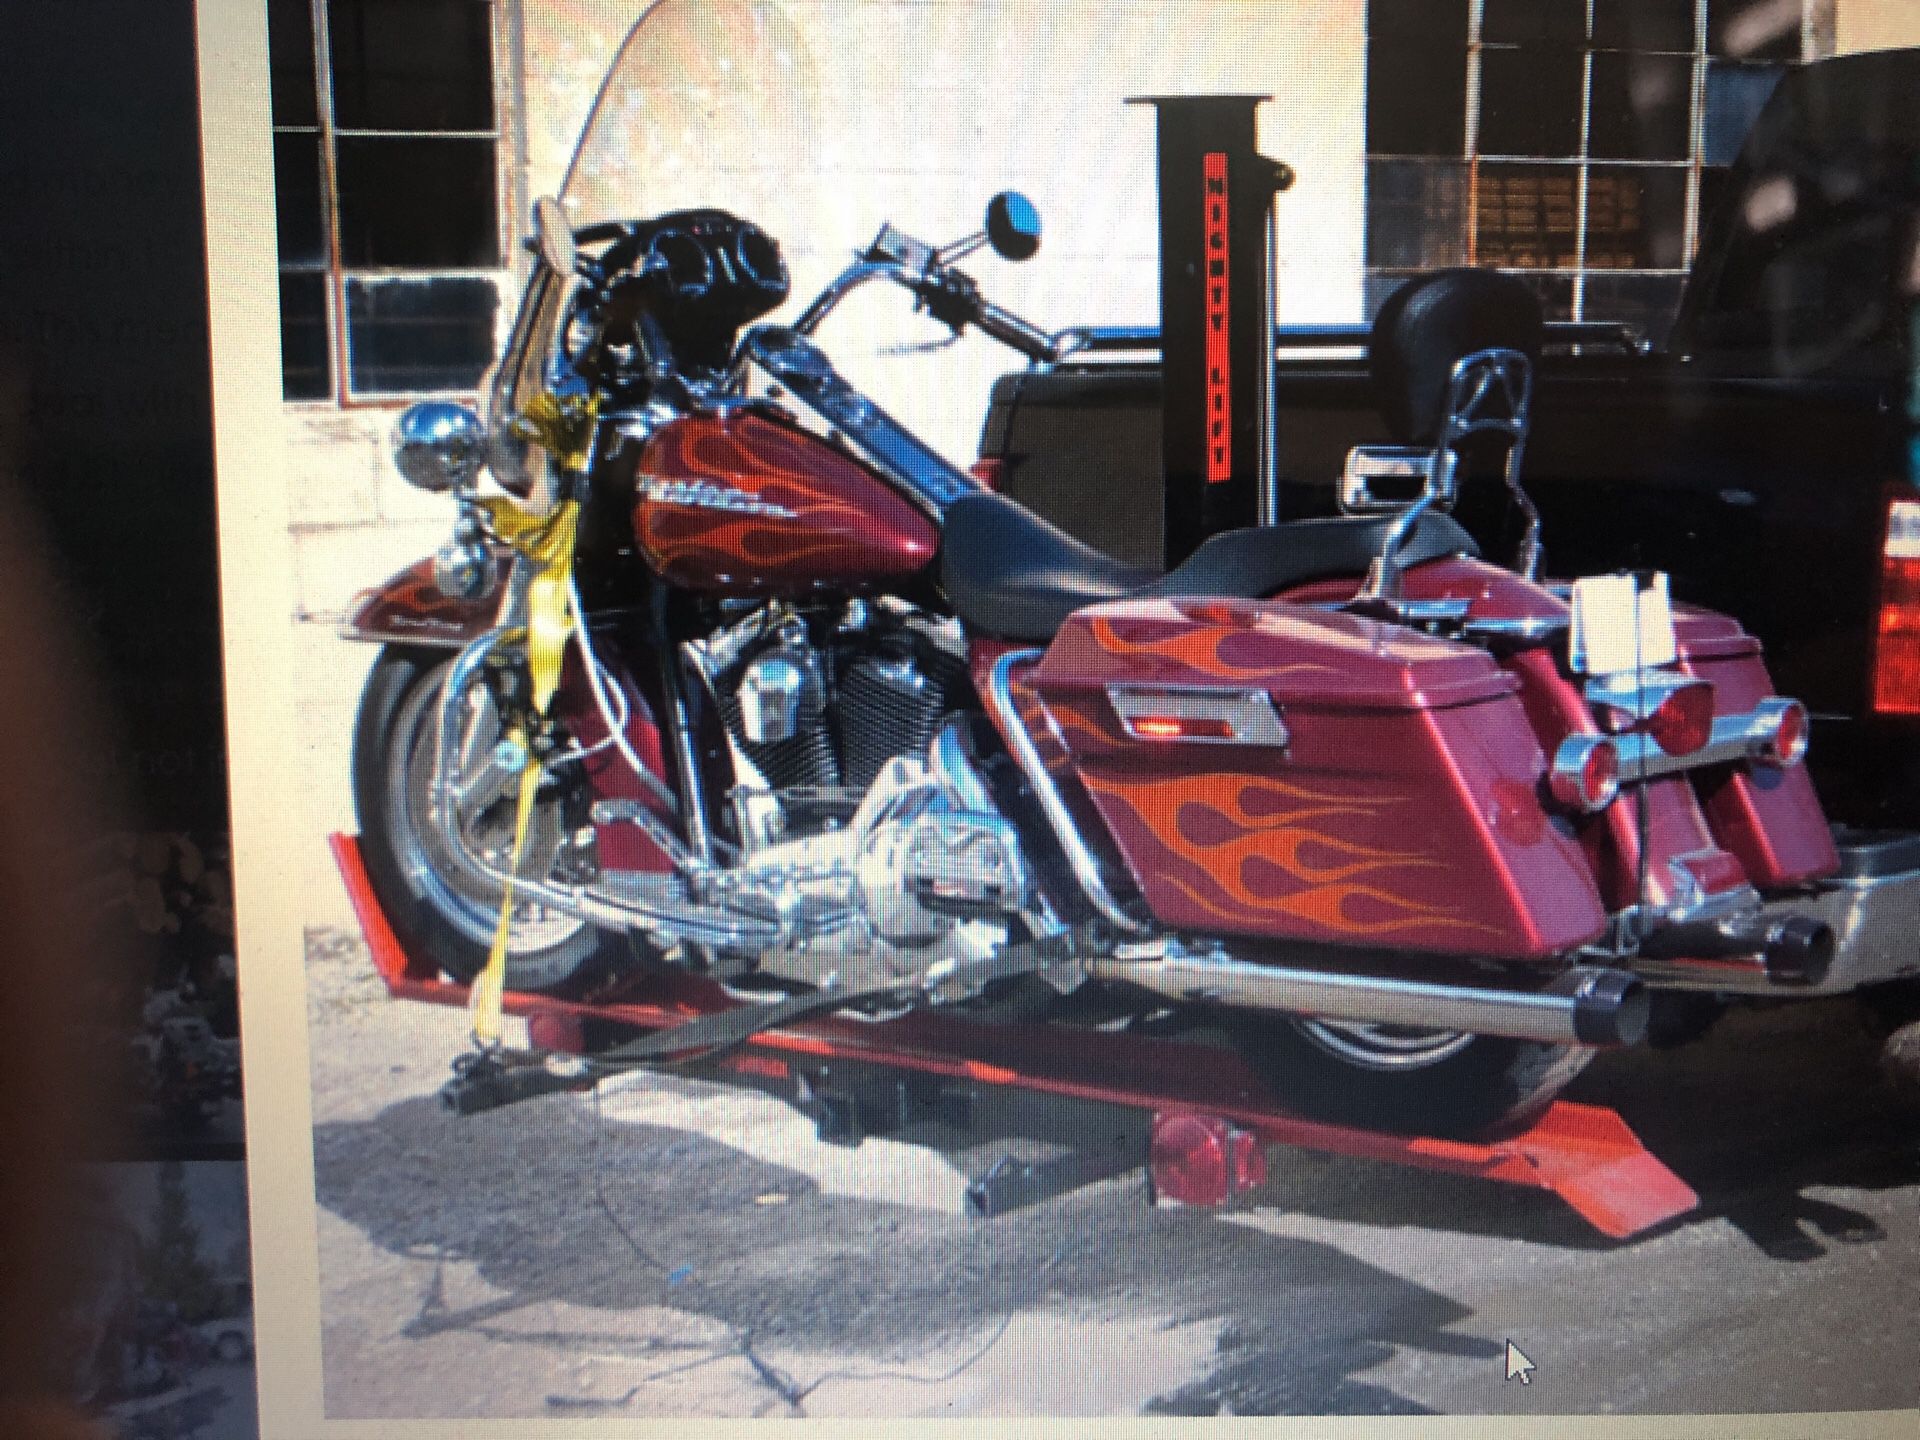 Mighty Hauler Motorcycle lift up to 1000 pounds. for Sale in Phoenix